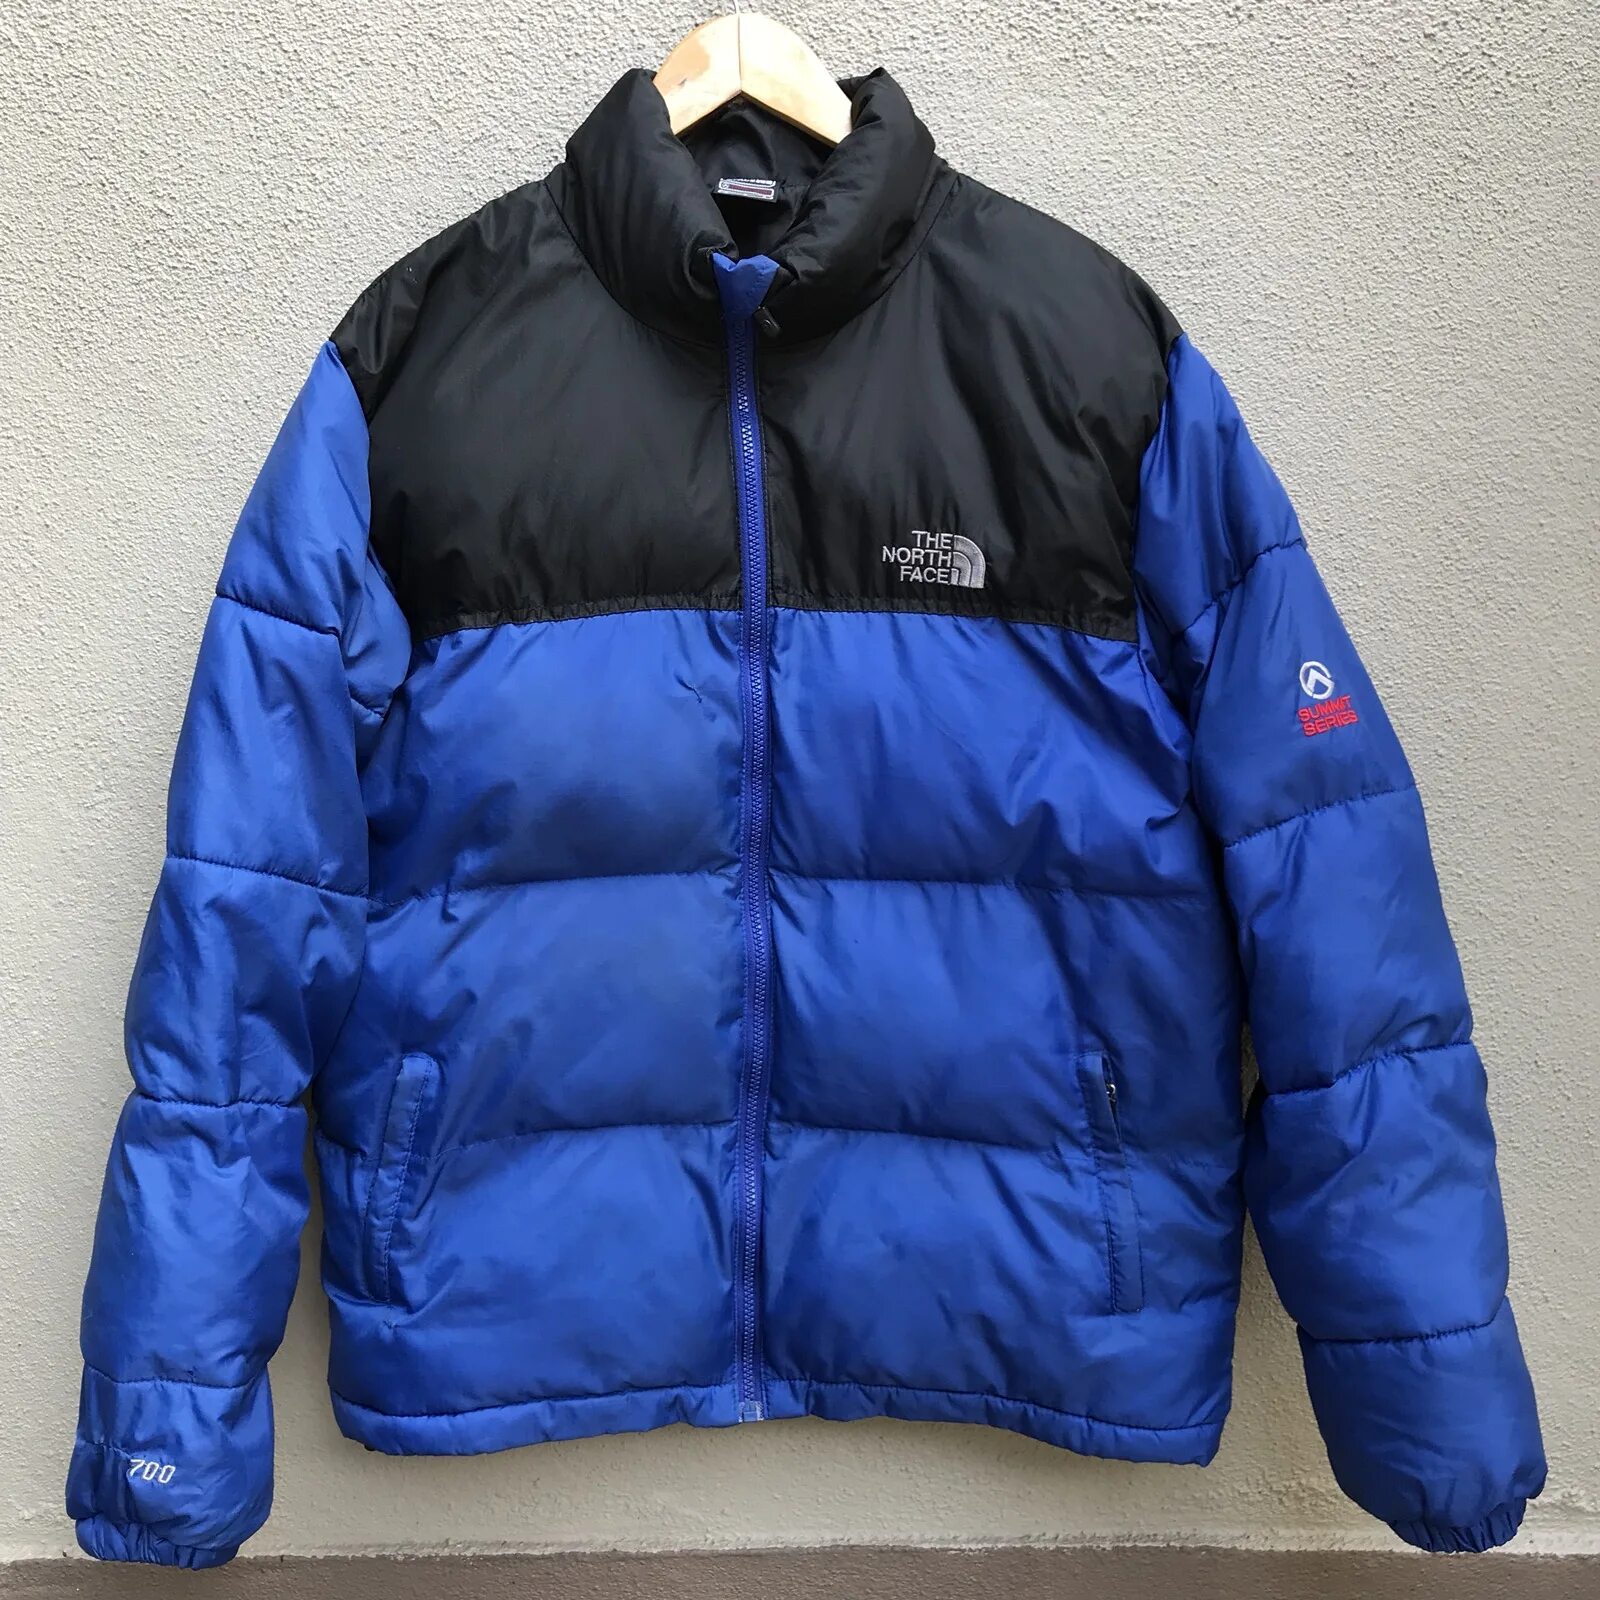 The north face summit series. The North face Summit Series 700. The North face Summit Series 700 пуховик. The North face пуховик 700 Summit Summit Series. TNF Baltoro 700 Summit Series.